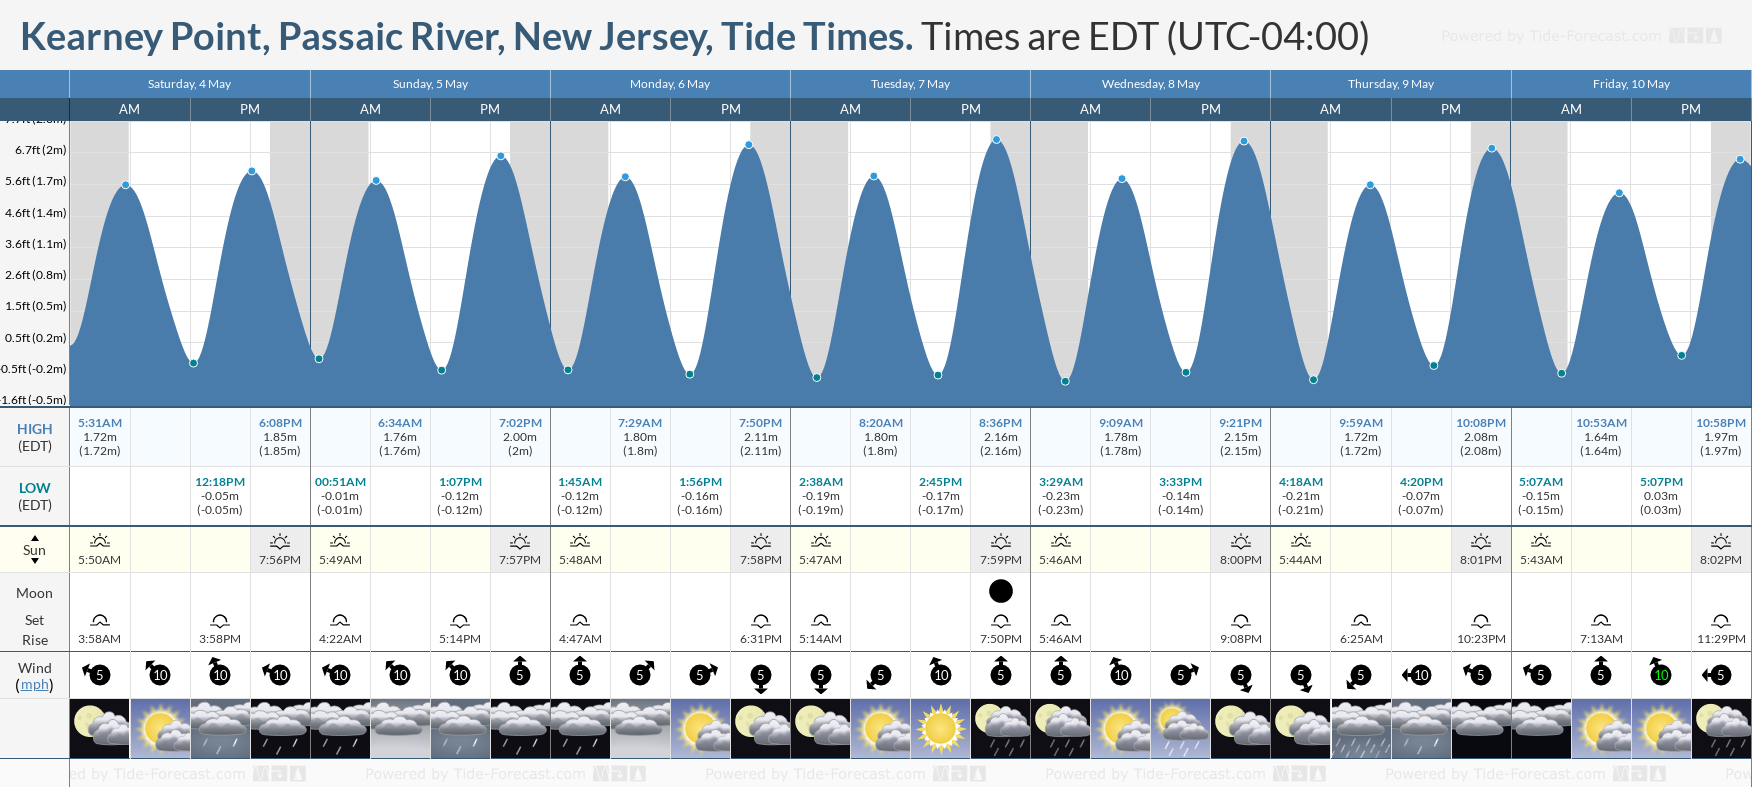 Kearney Point, Passaic River, New Jersey Tide Chart including high and low tide tide times for the next 7 days